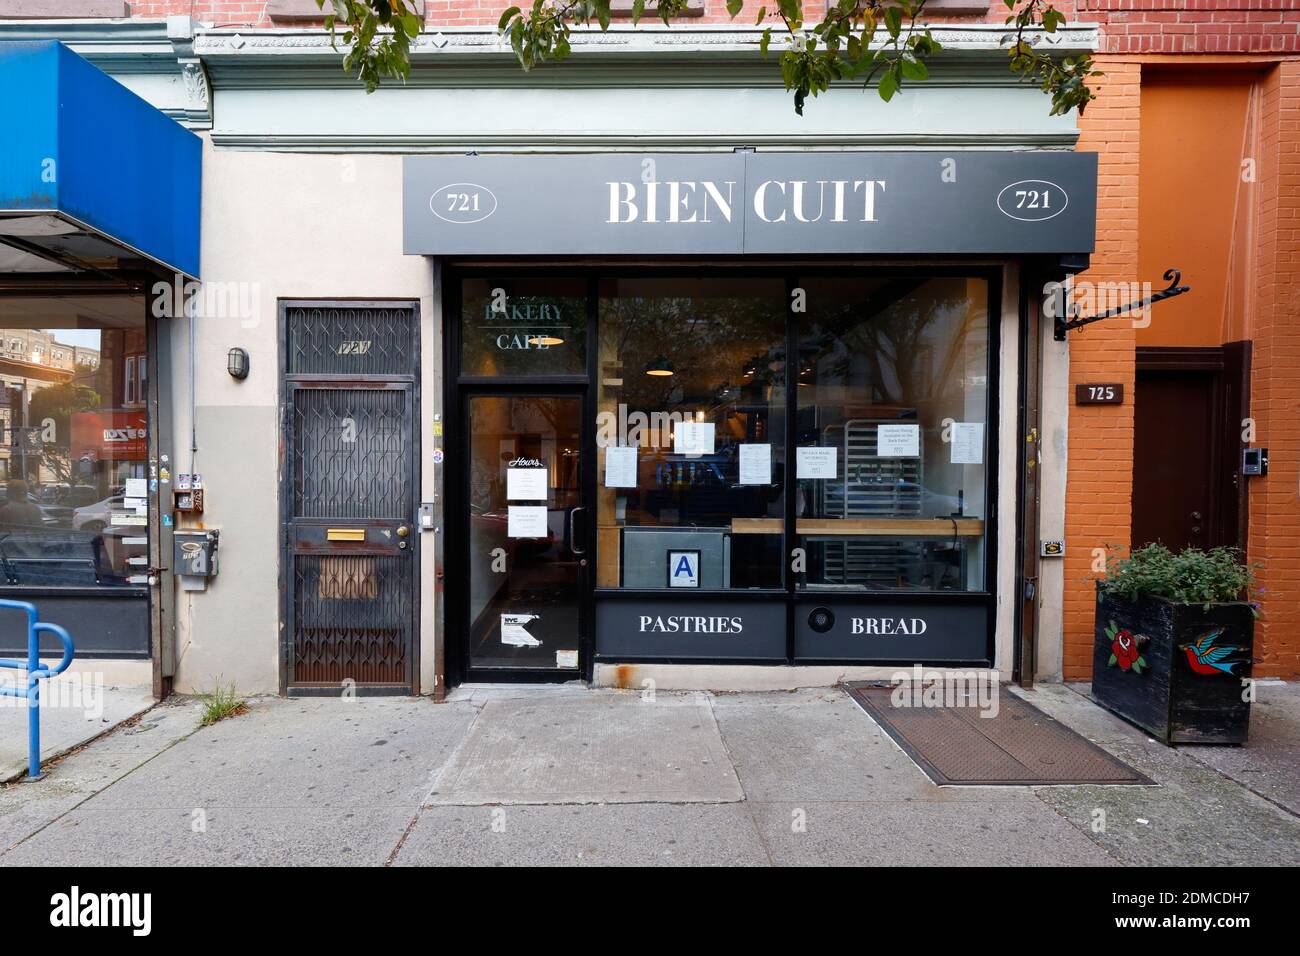 Bien Cuit, 721 Franklin Ave, Brooklyn, New York. NYC storefront photo of a French bakery in the Crown Heights neighborhood. Stock Photo